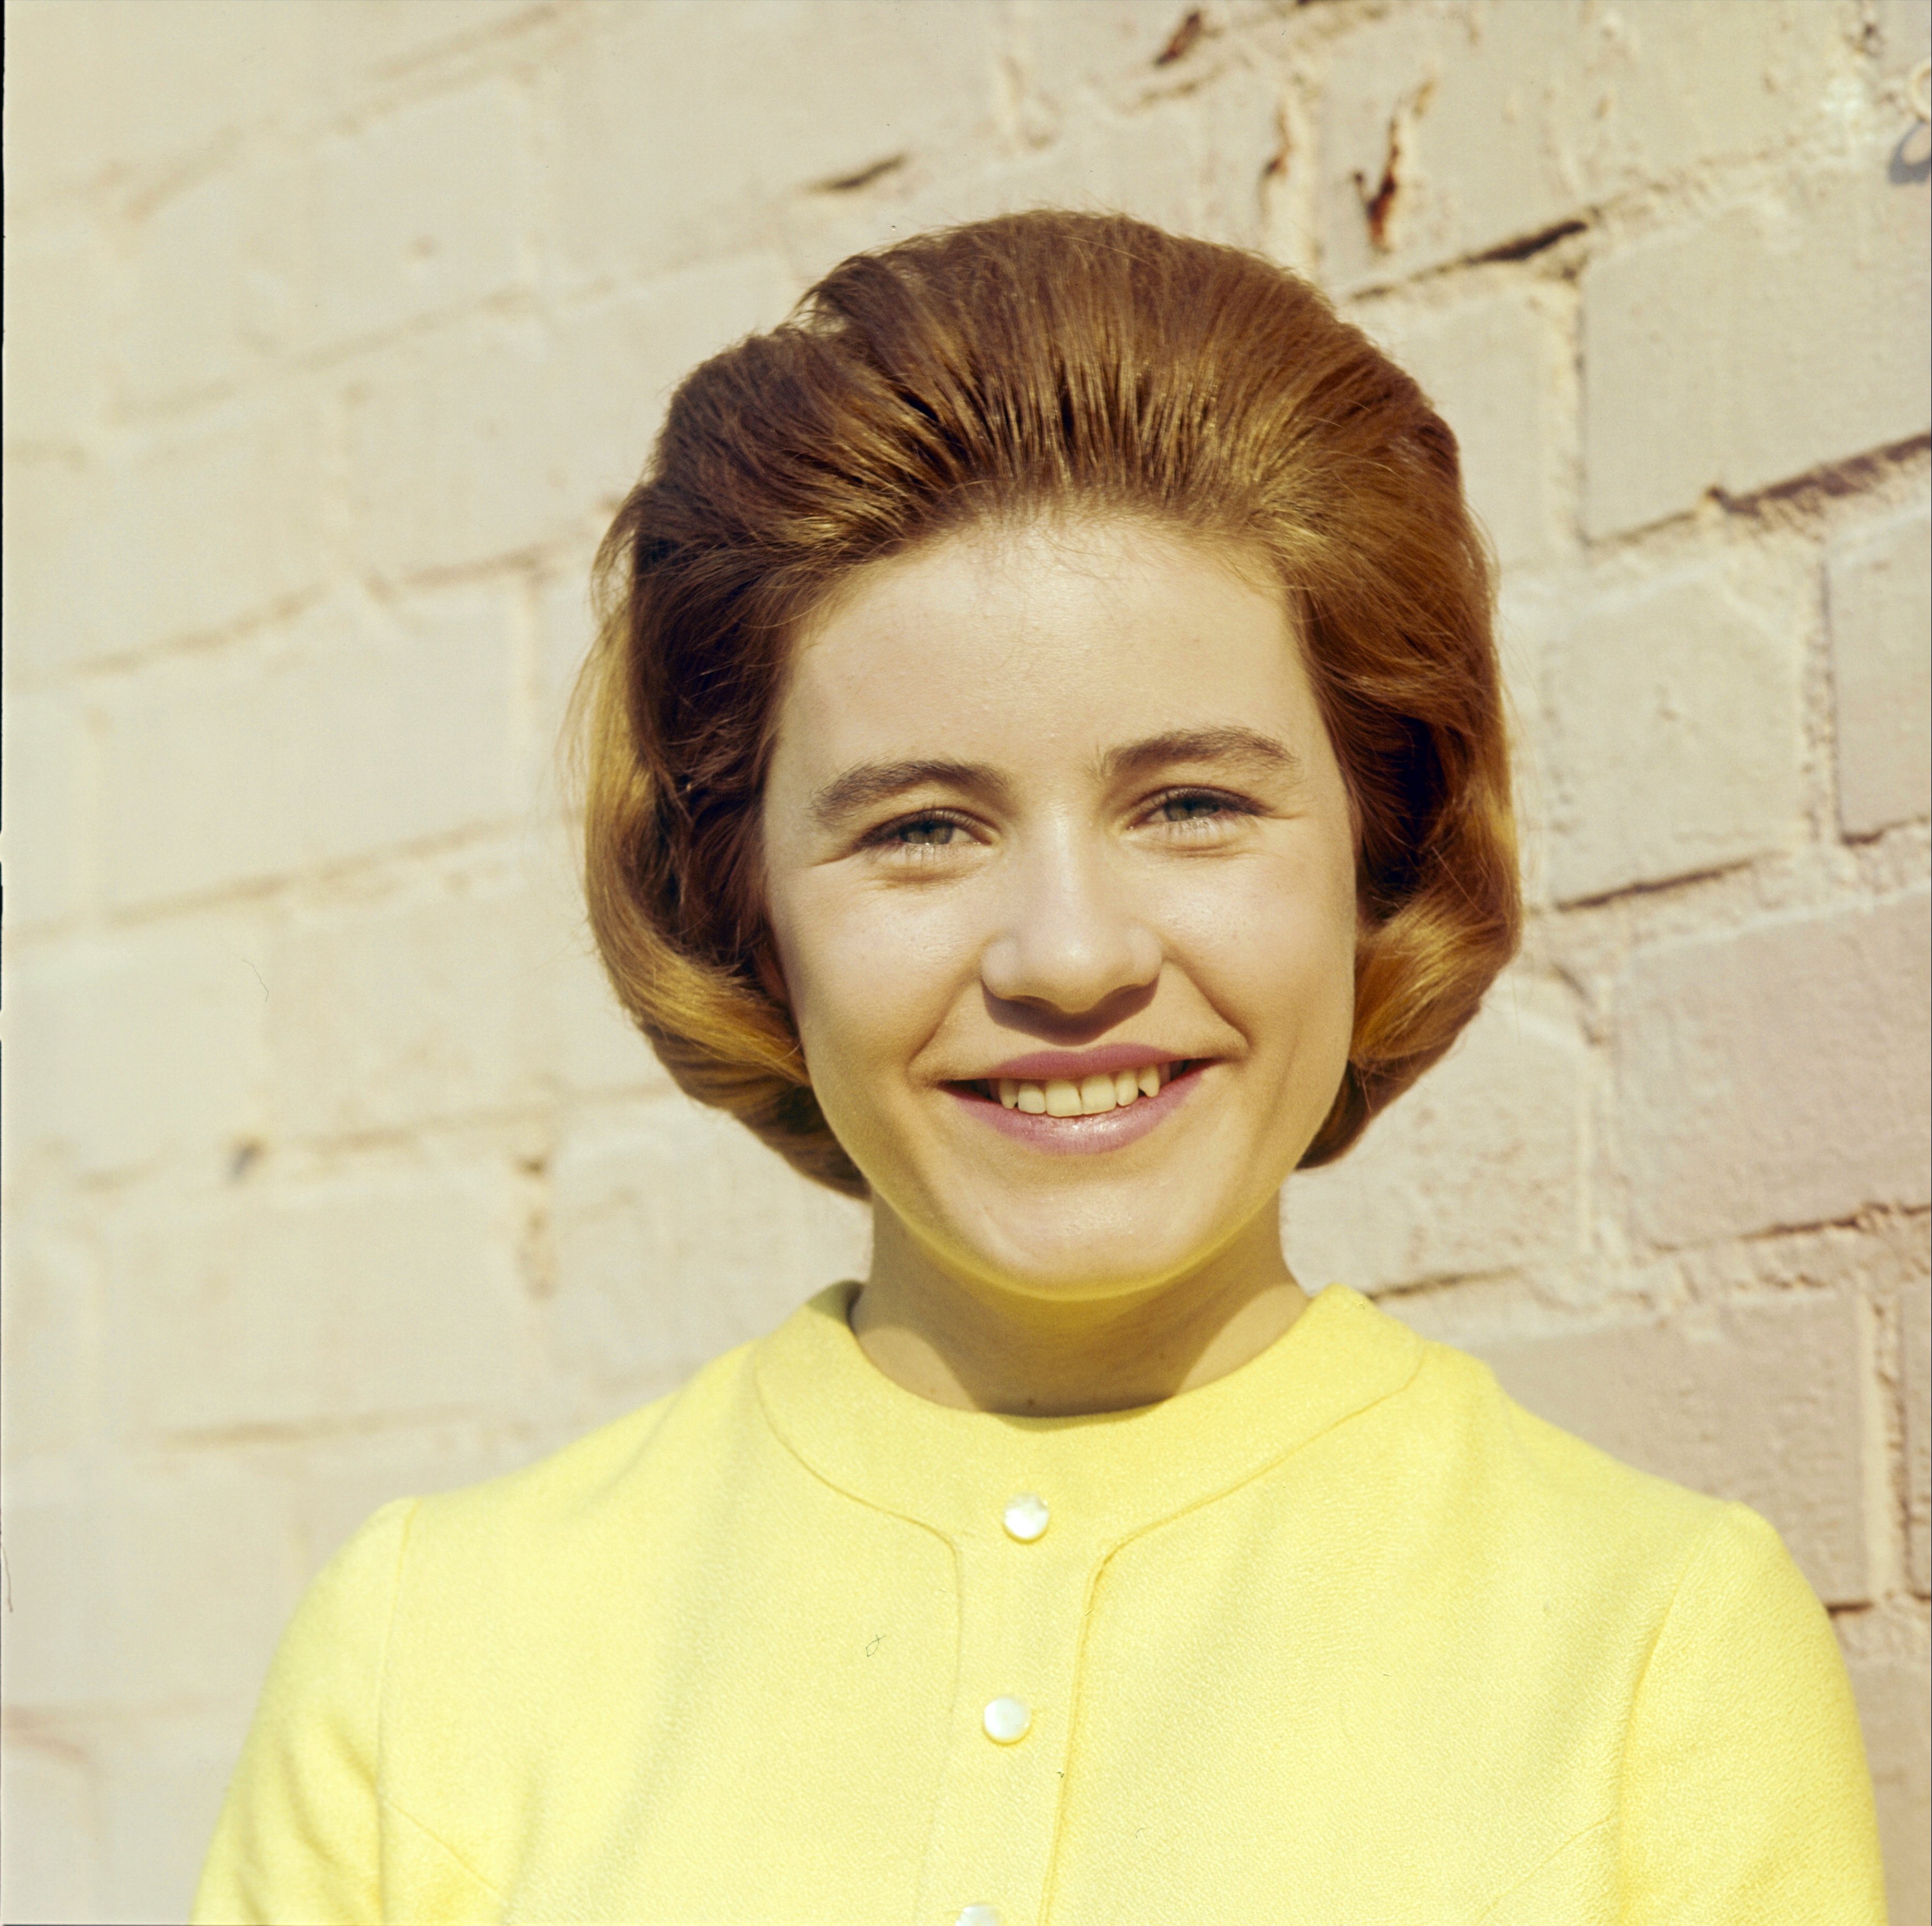 Patty Duke on "The Patty Duke Show" in 1963 | Source: Getty Images